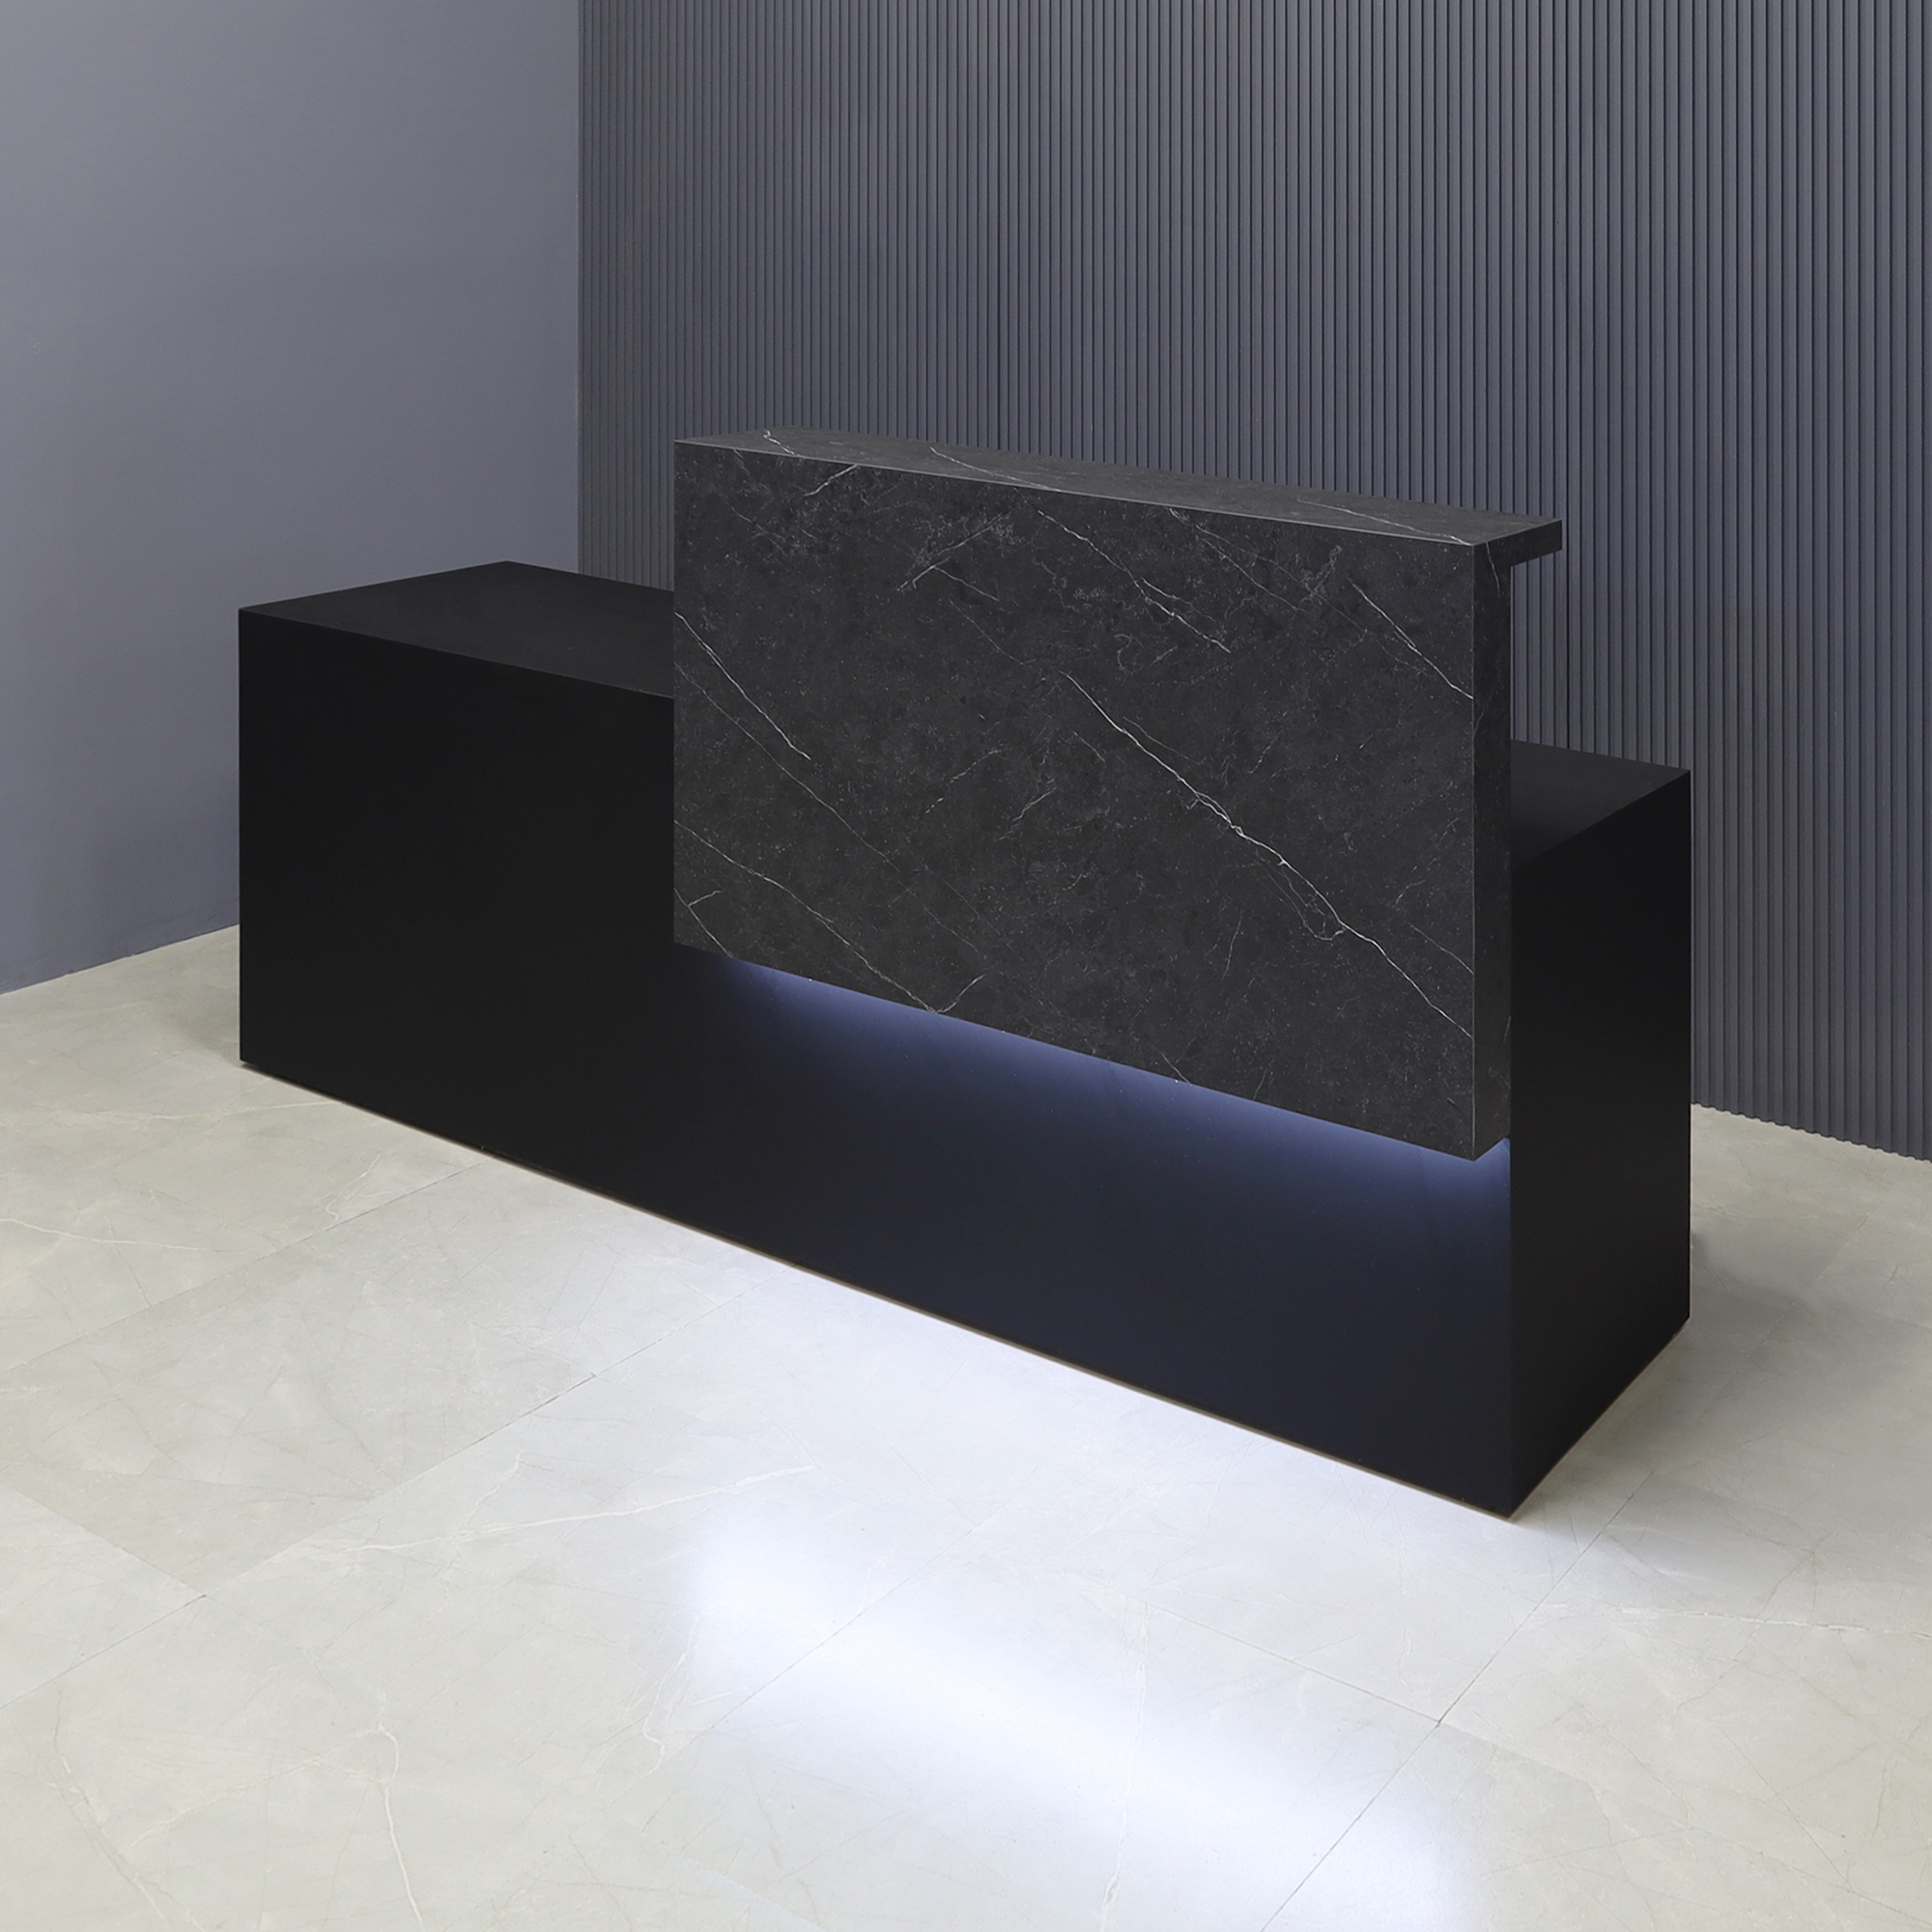 90-inch Los Angeles ADA Compliant Custom Reception Desk, right side when facing front in black stone PVC counter and black traceless laminate desk, with warm white LED, shown here.